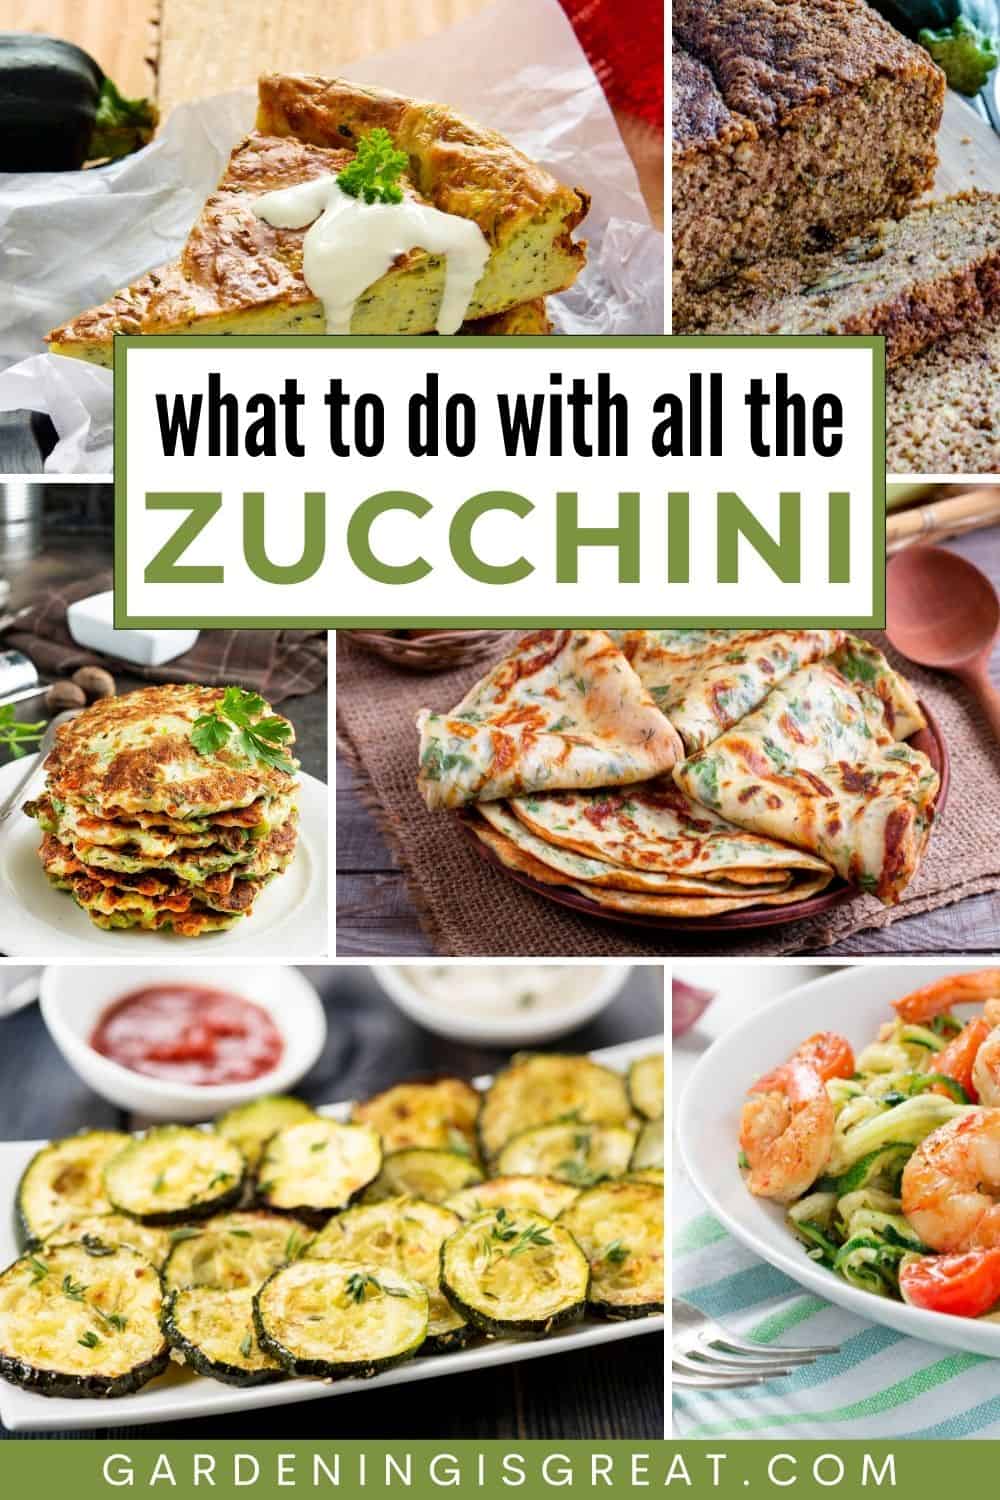 Zucchini Recipes For Your Summer Harvest | Gardening is Great